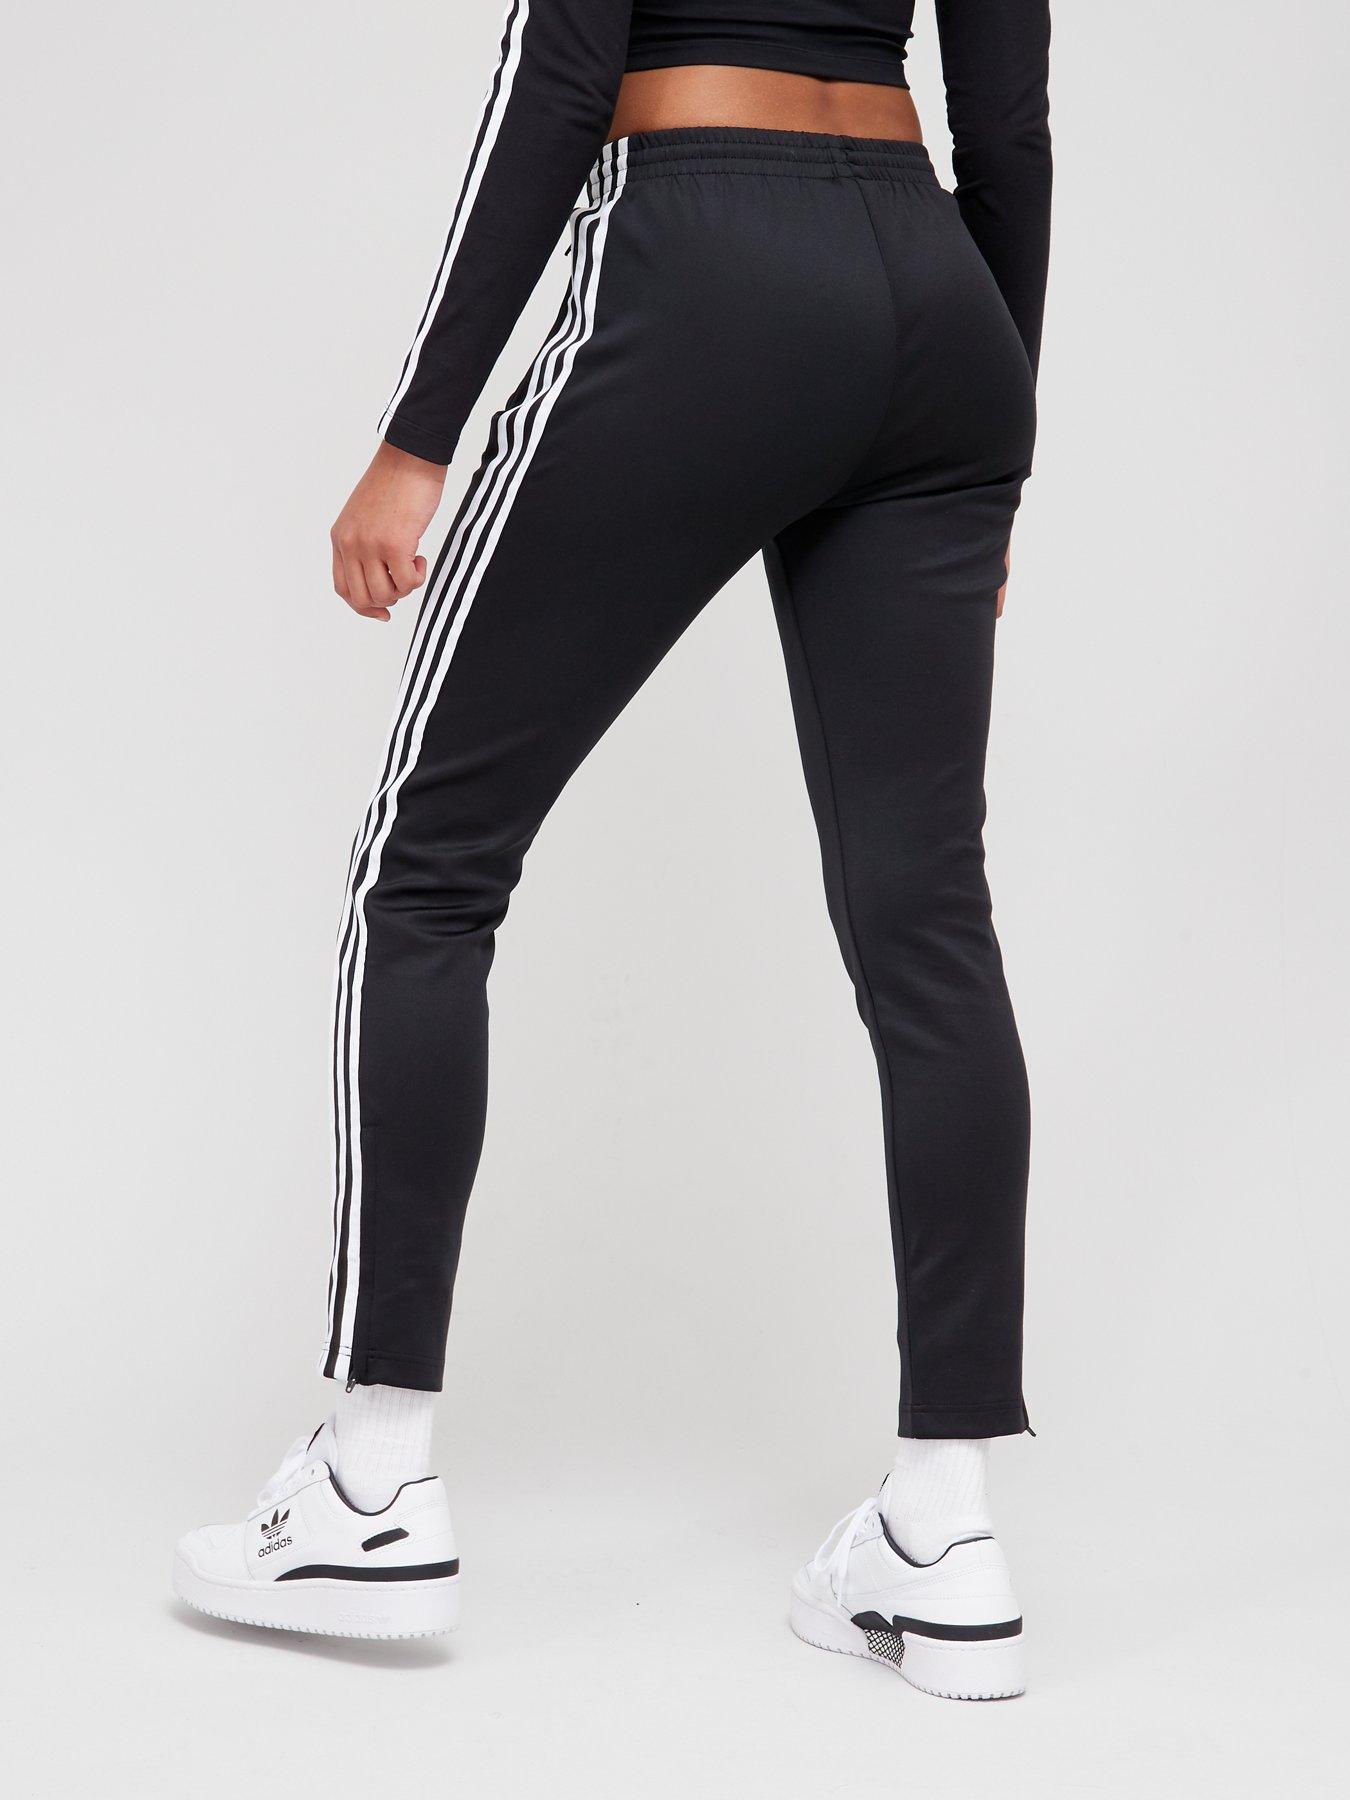 adidas Originals Women's Superstar Track Pant, Black/White, L : ADIDAS:  Clothing, Shoes & Jewelry 